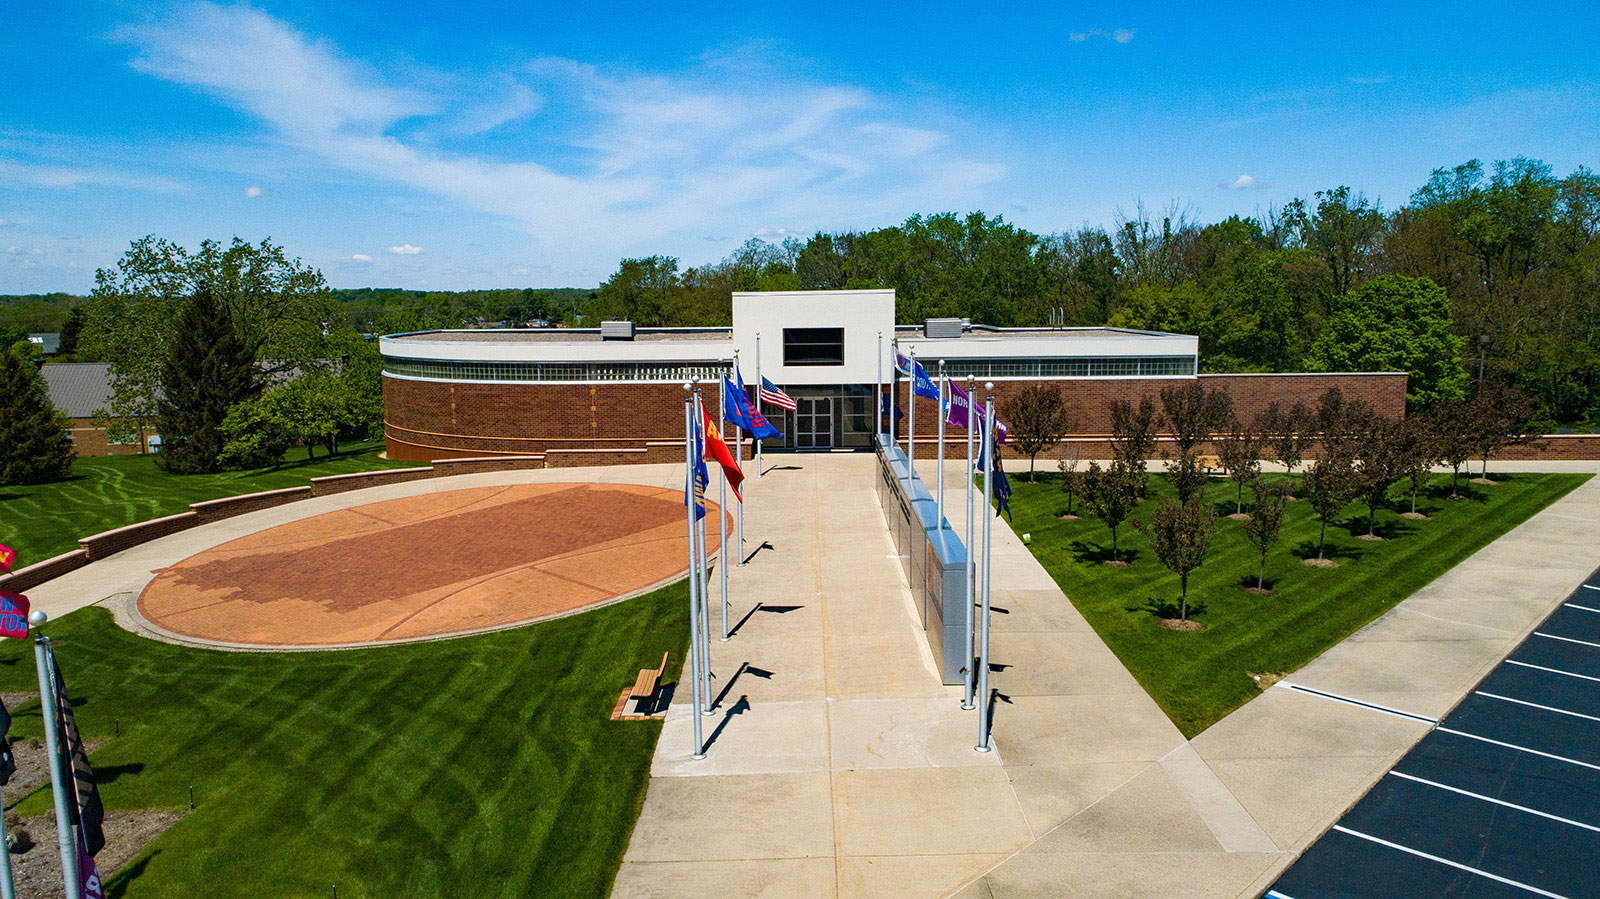 The Indiana Basketball Hall of Fame against a blue sky